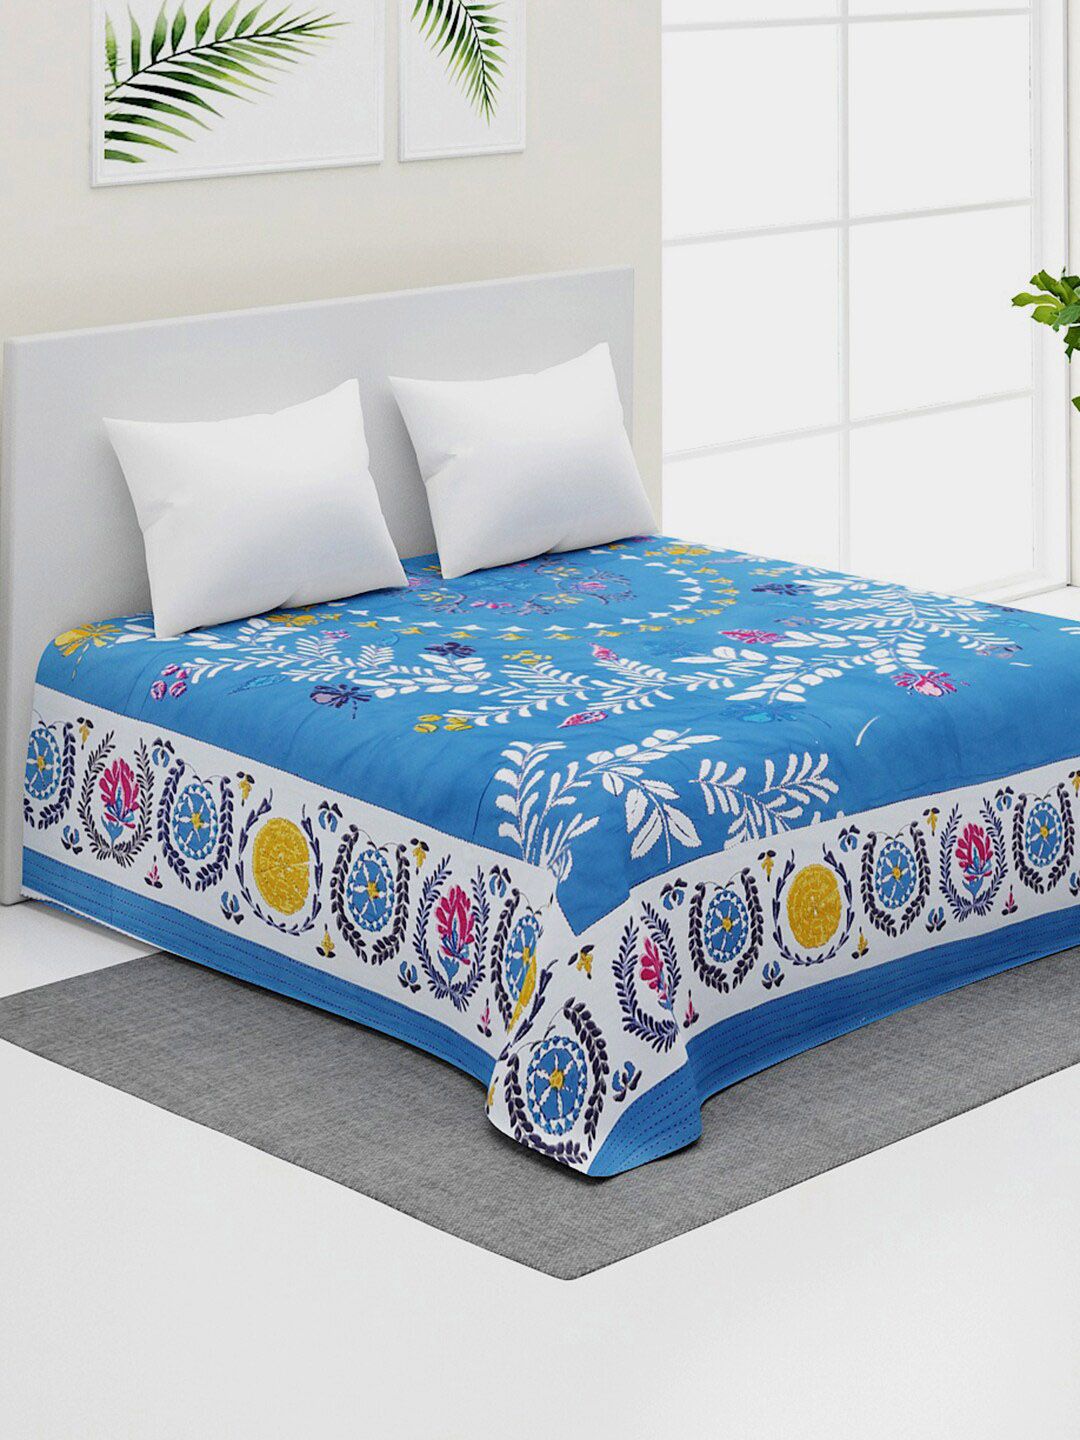 Rajasthan Decor Blue & White Hand Embroidered Pure Cotton Bed Cover Price in India